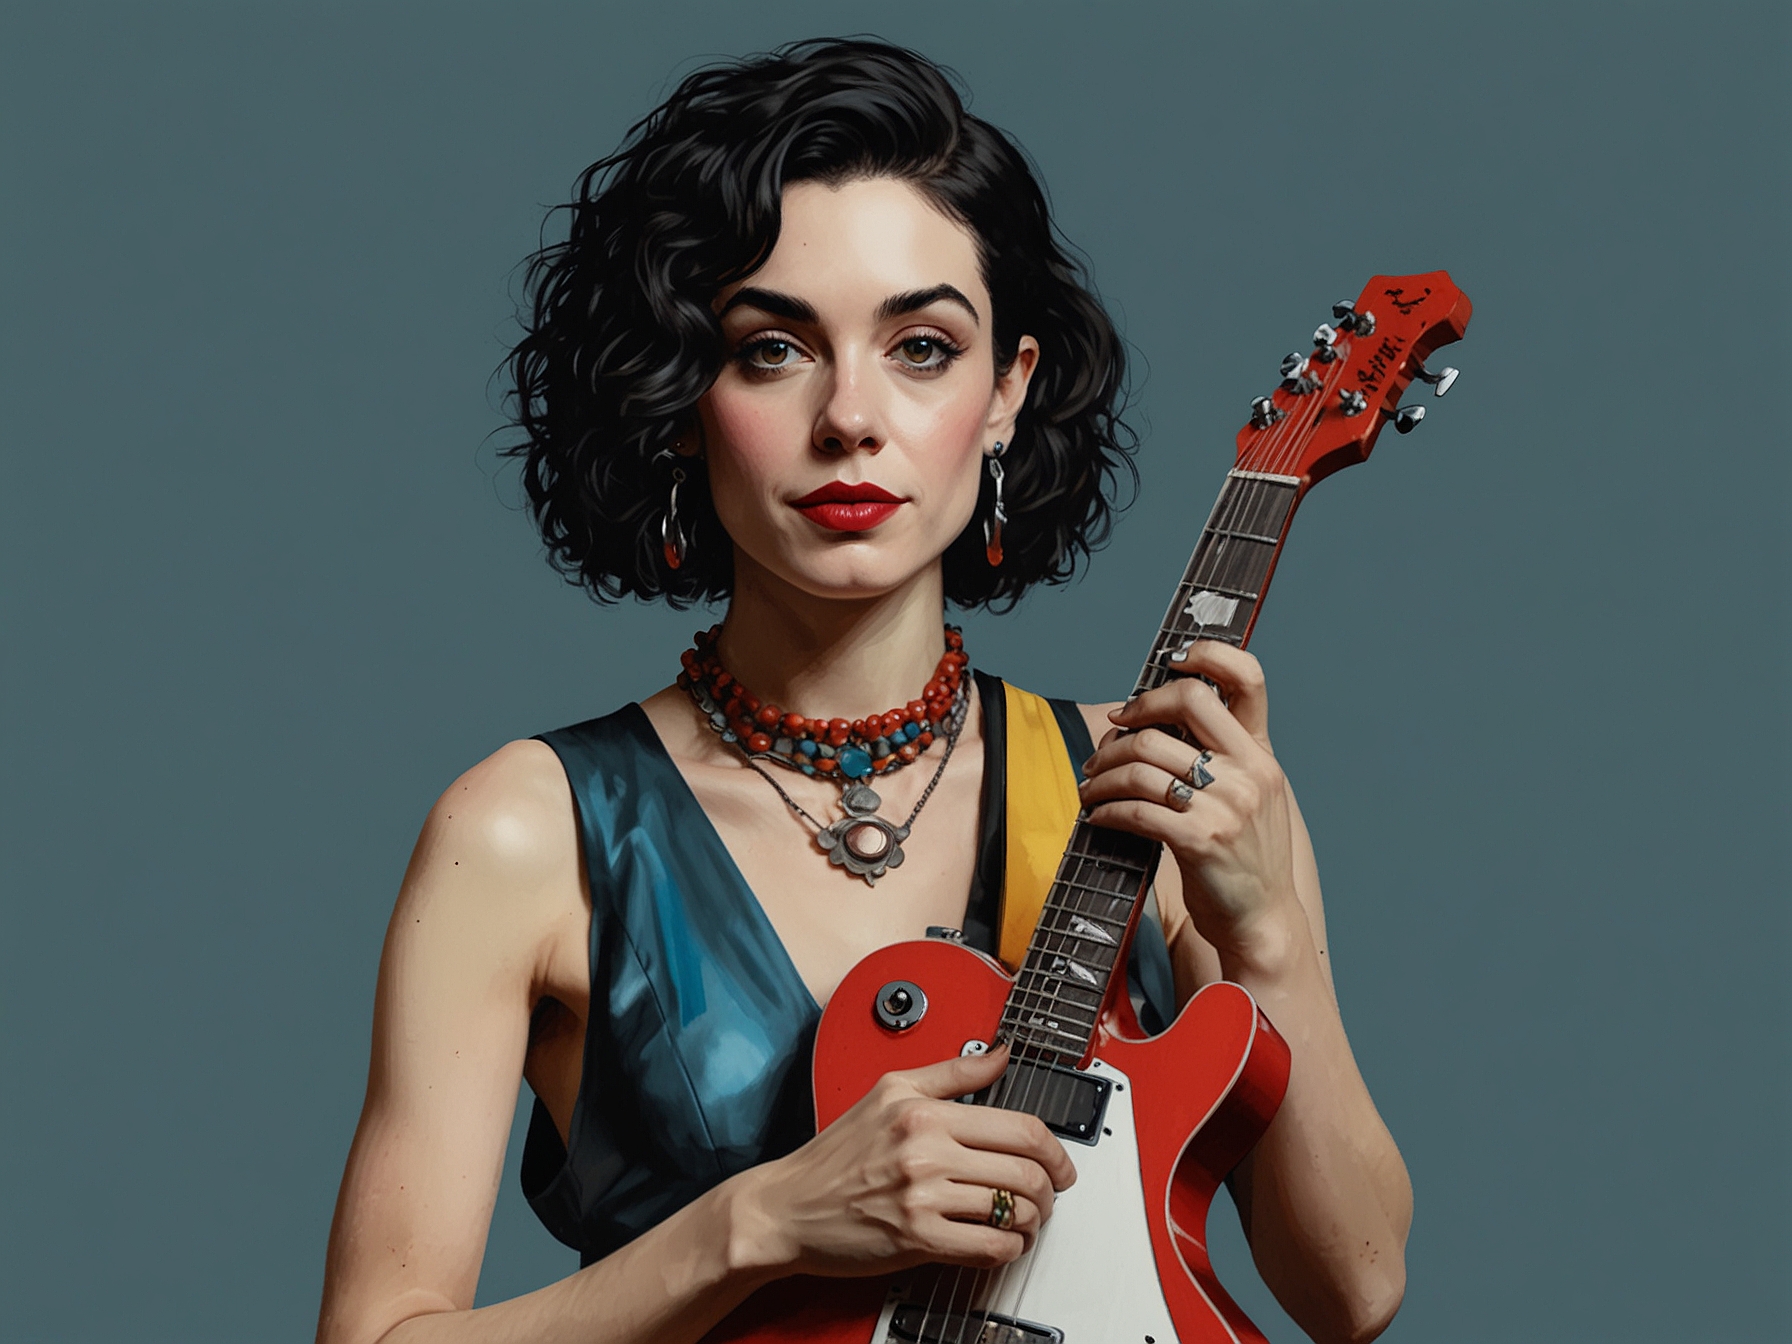 Annie Clark, aka St. Vincent, poses in an avant-garde outfit, holding her signature guitar. The vibrant setting and bold fashion choices perfectly capture her eclectic style and musical innovation.